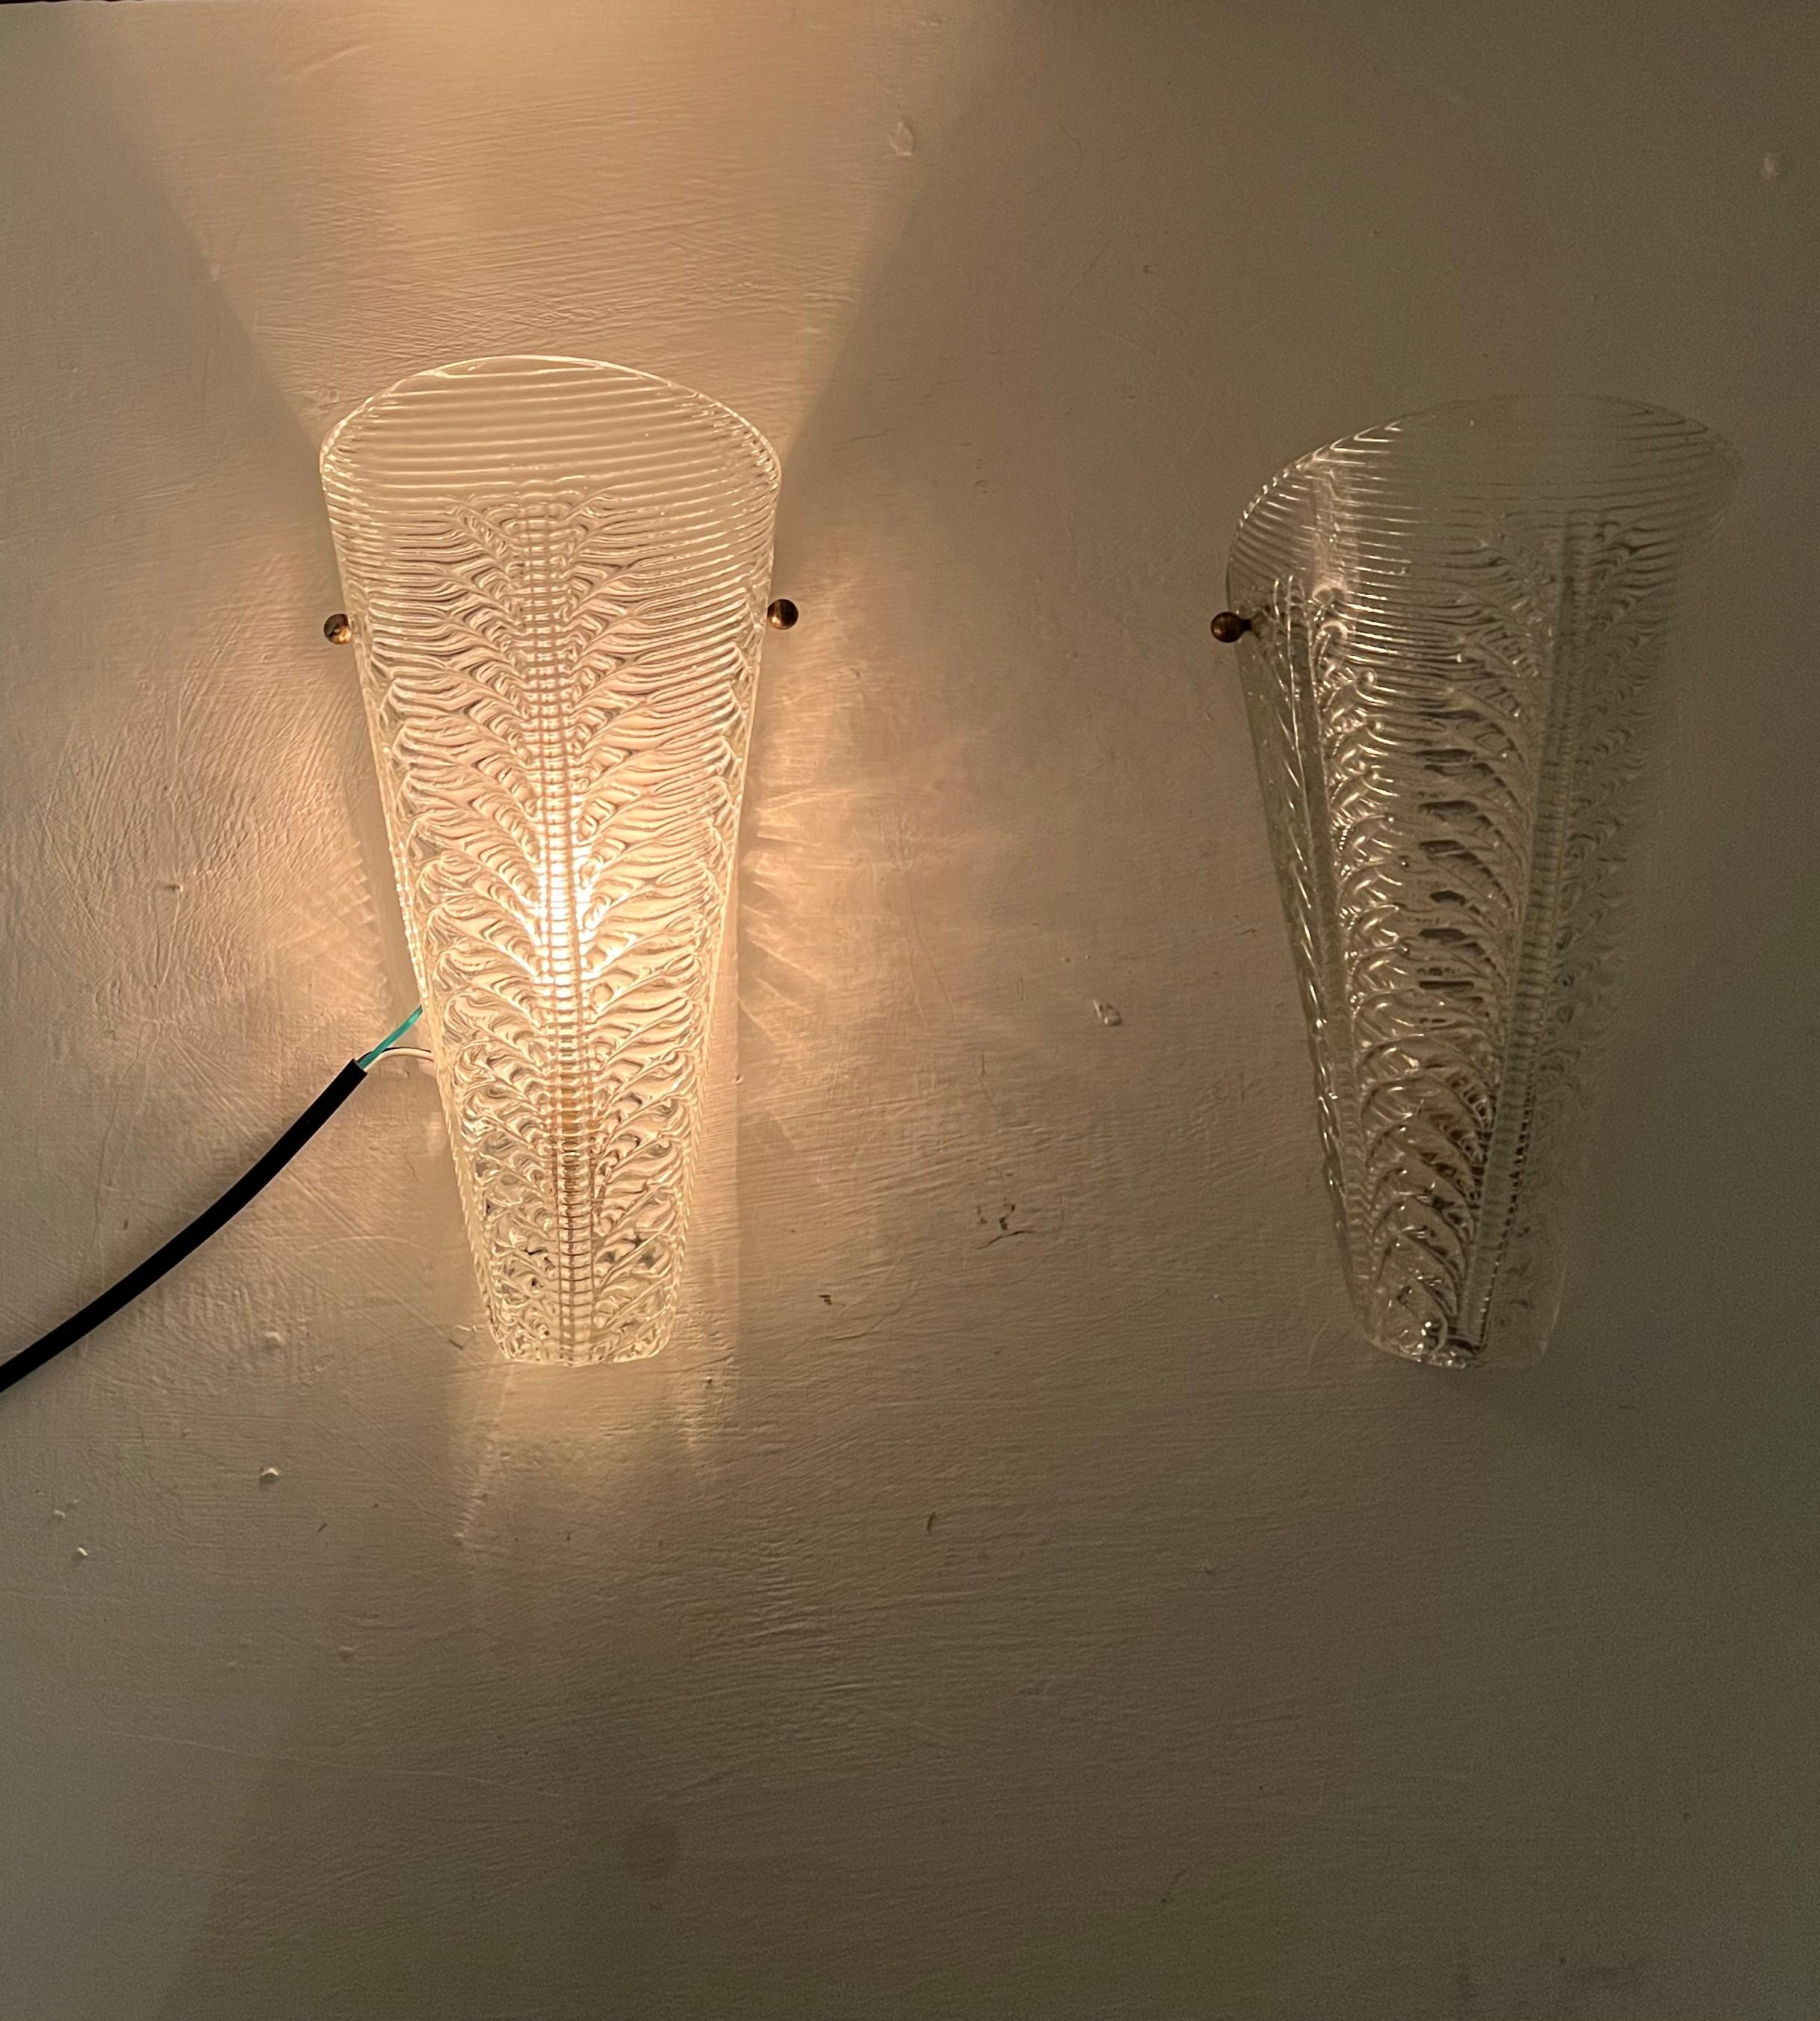 Mid-20th Century Pair of Art Deco Sconces, circa 1940 by Seguso in Murano Glass, Italy, 1940s For Sale